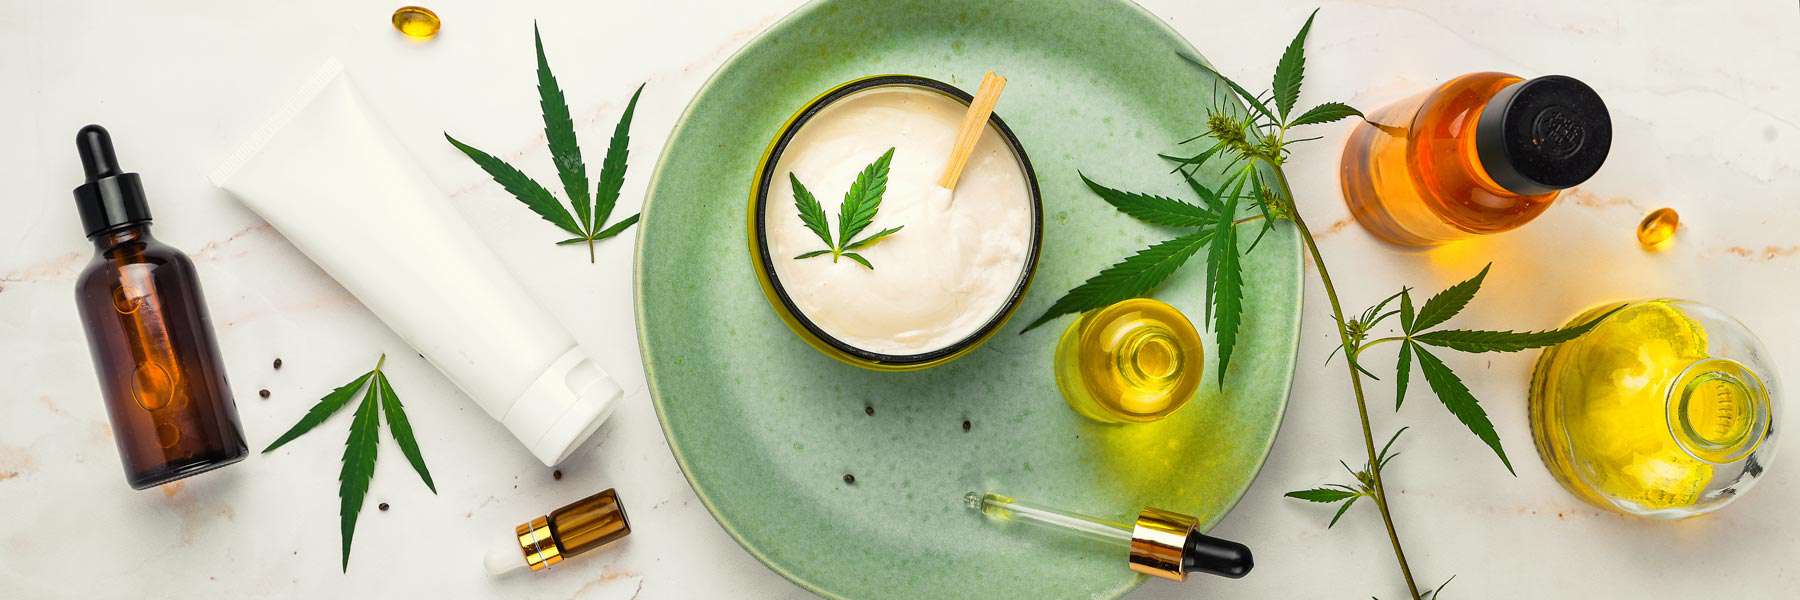 How to Make Your Own Cannabis Tincture at Home: A Step-by-Step Guide